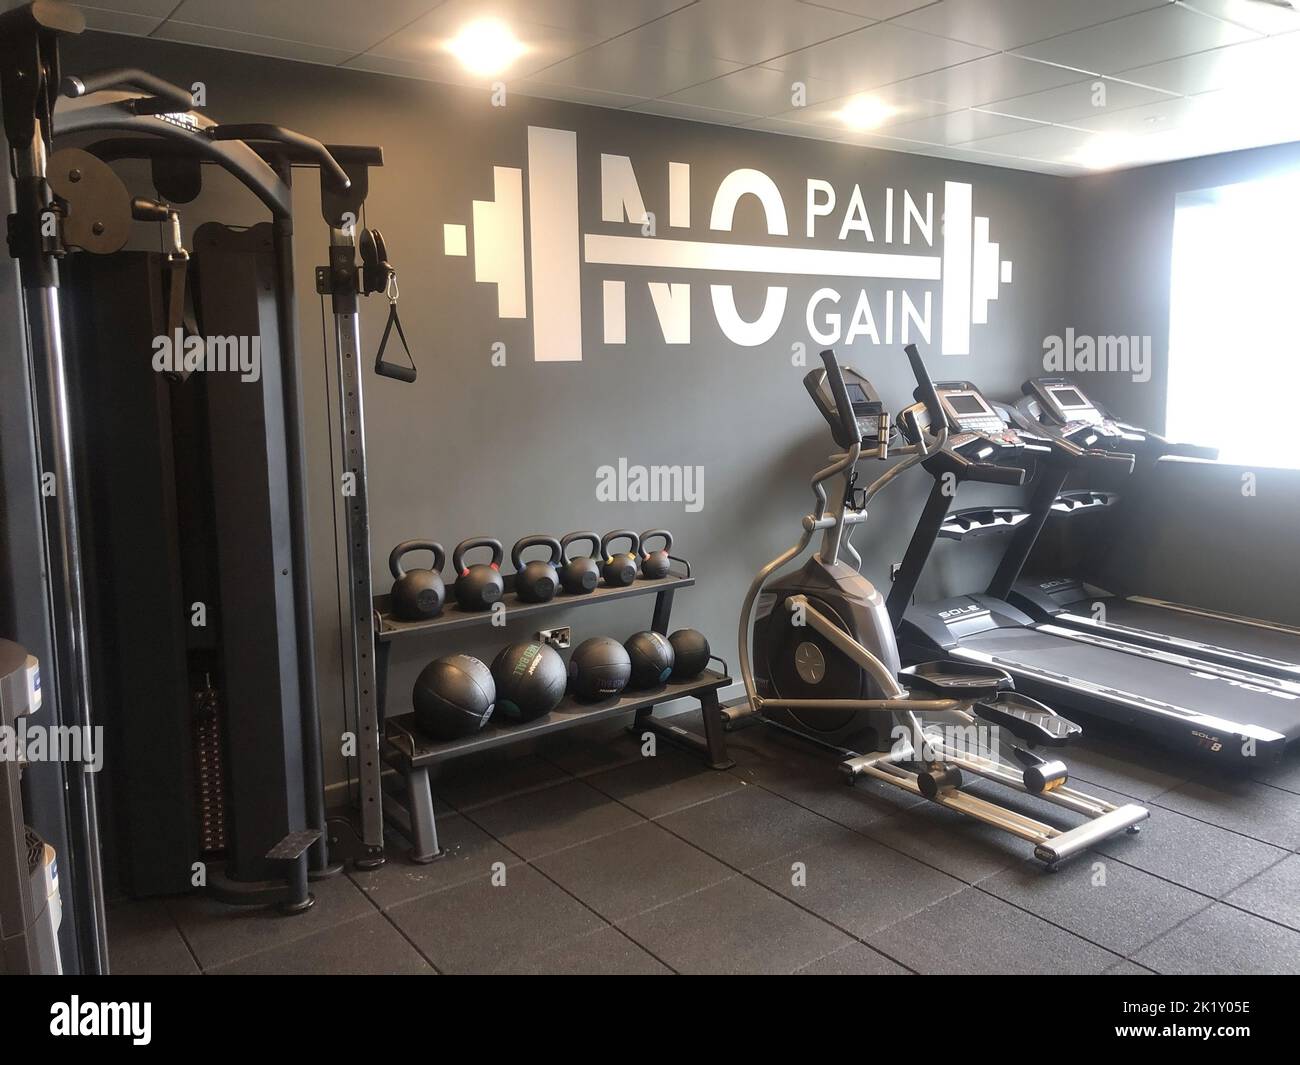 No pain, no gain. Health Fitness motivational quotes. gym fitness saloon Stock Photo